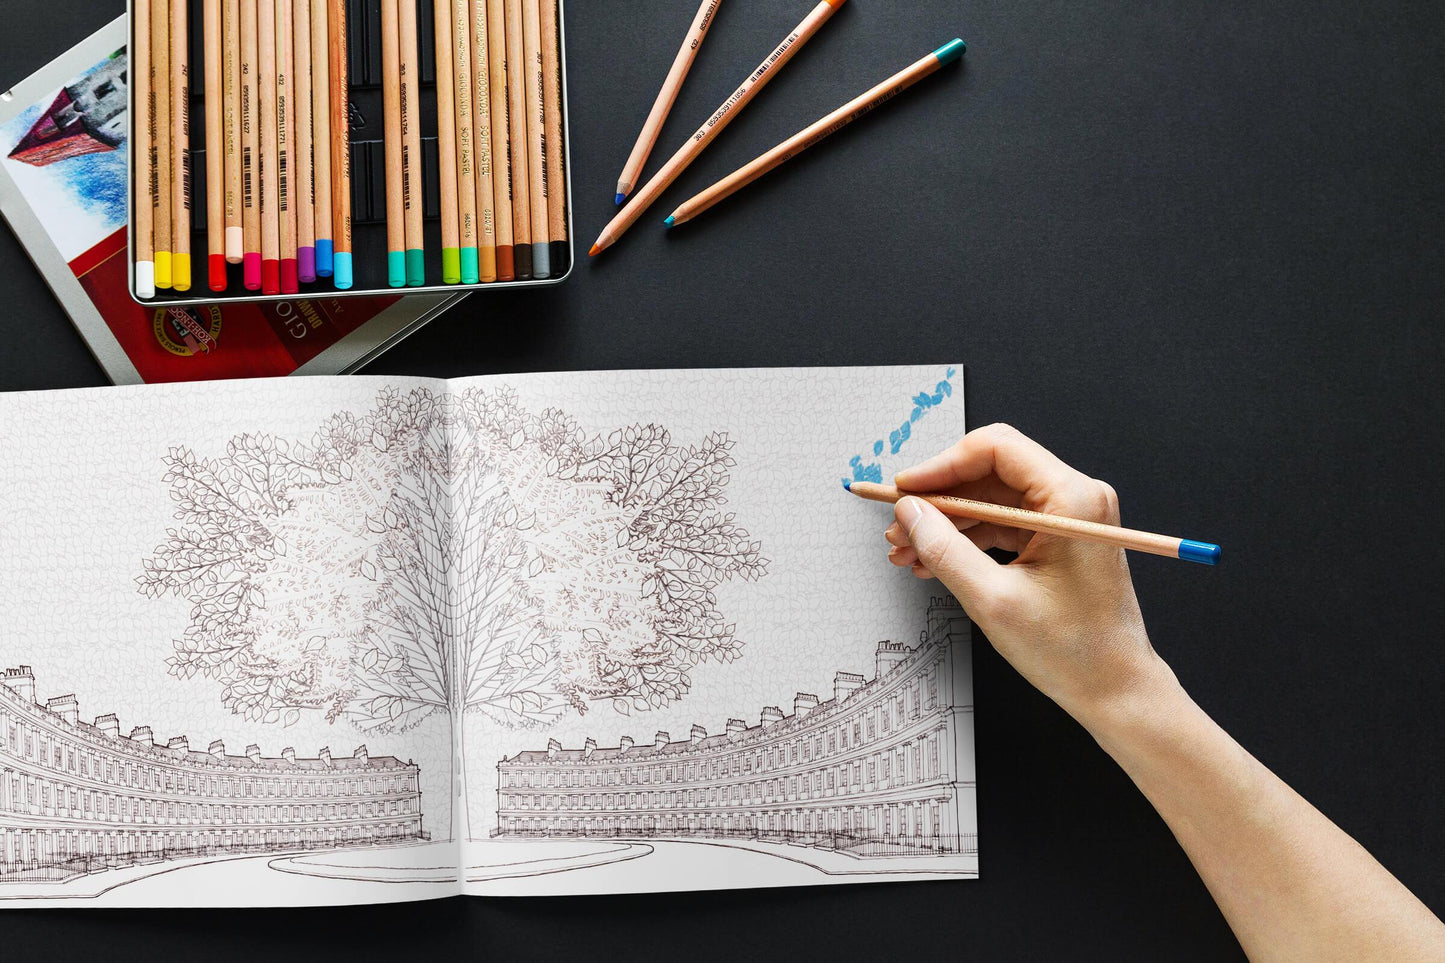 The Architectural Colouring Book